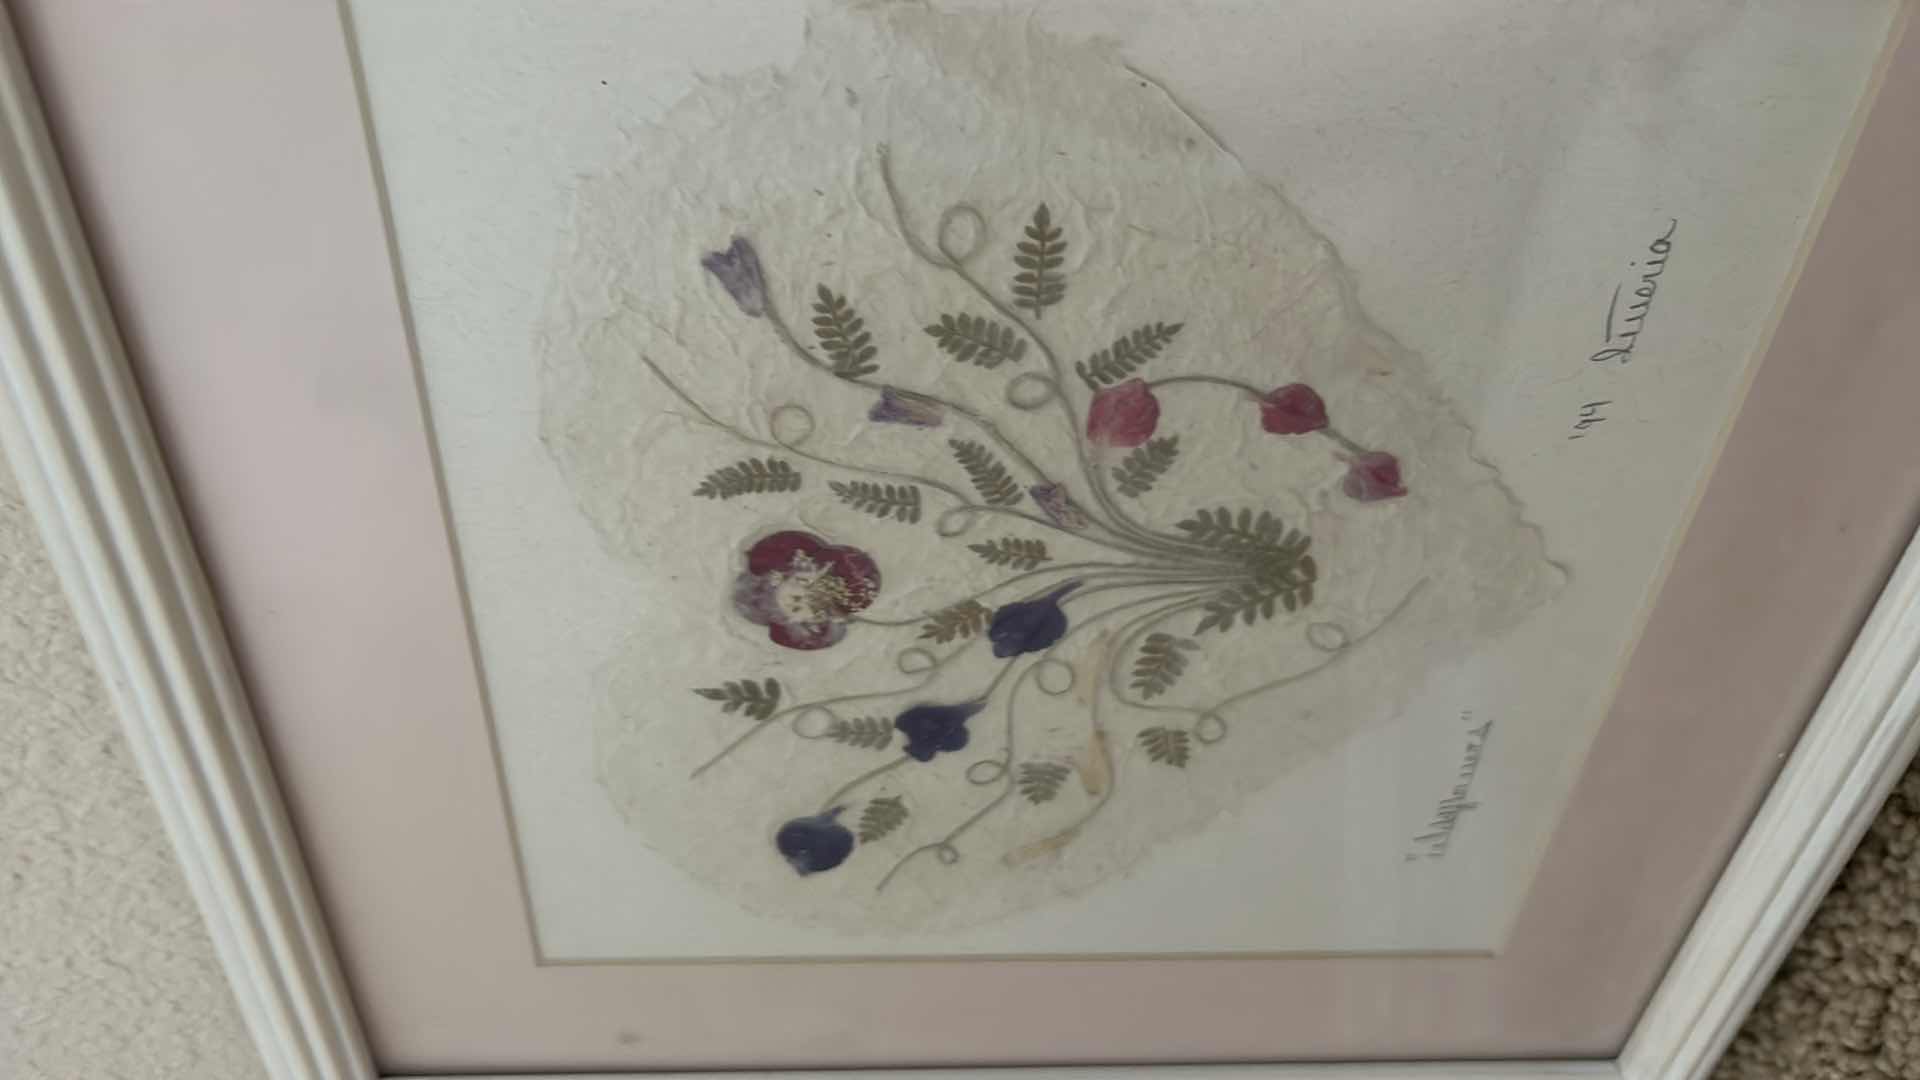 Photo 4 of "Wildflowers" signed pressed flower heart artwork framed 11“ x 11“